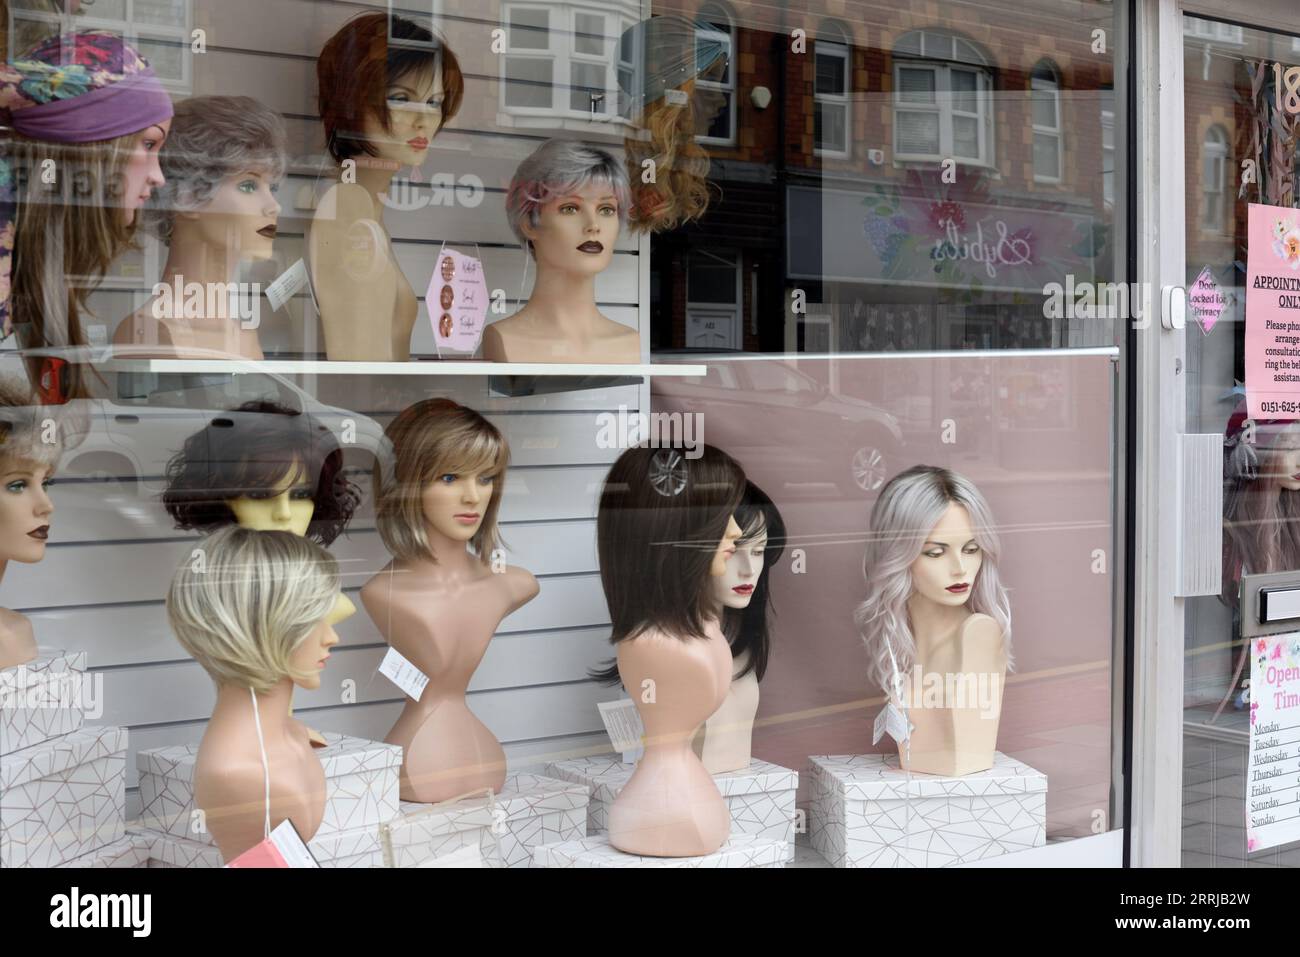 Hairdressers or Hairdresser Shop Window, Display Window or Store Window with Display of Mannequins or Dummies with Wigs and Topknots West Kirby E Stock Photo